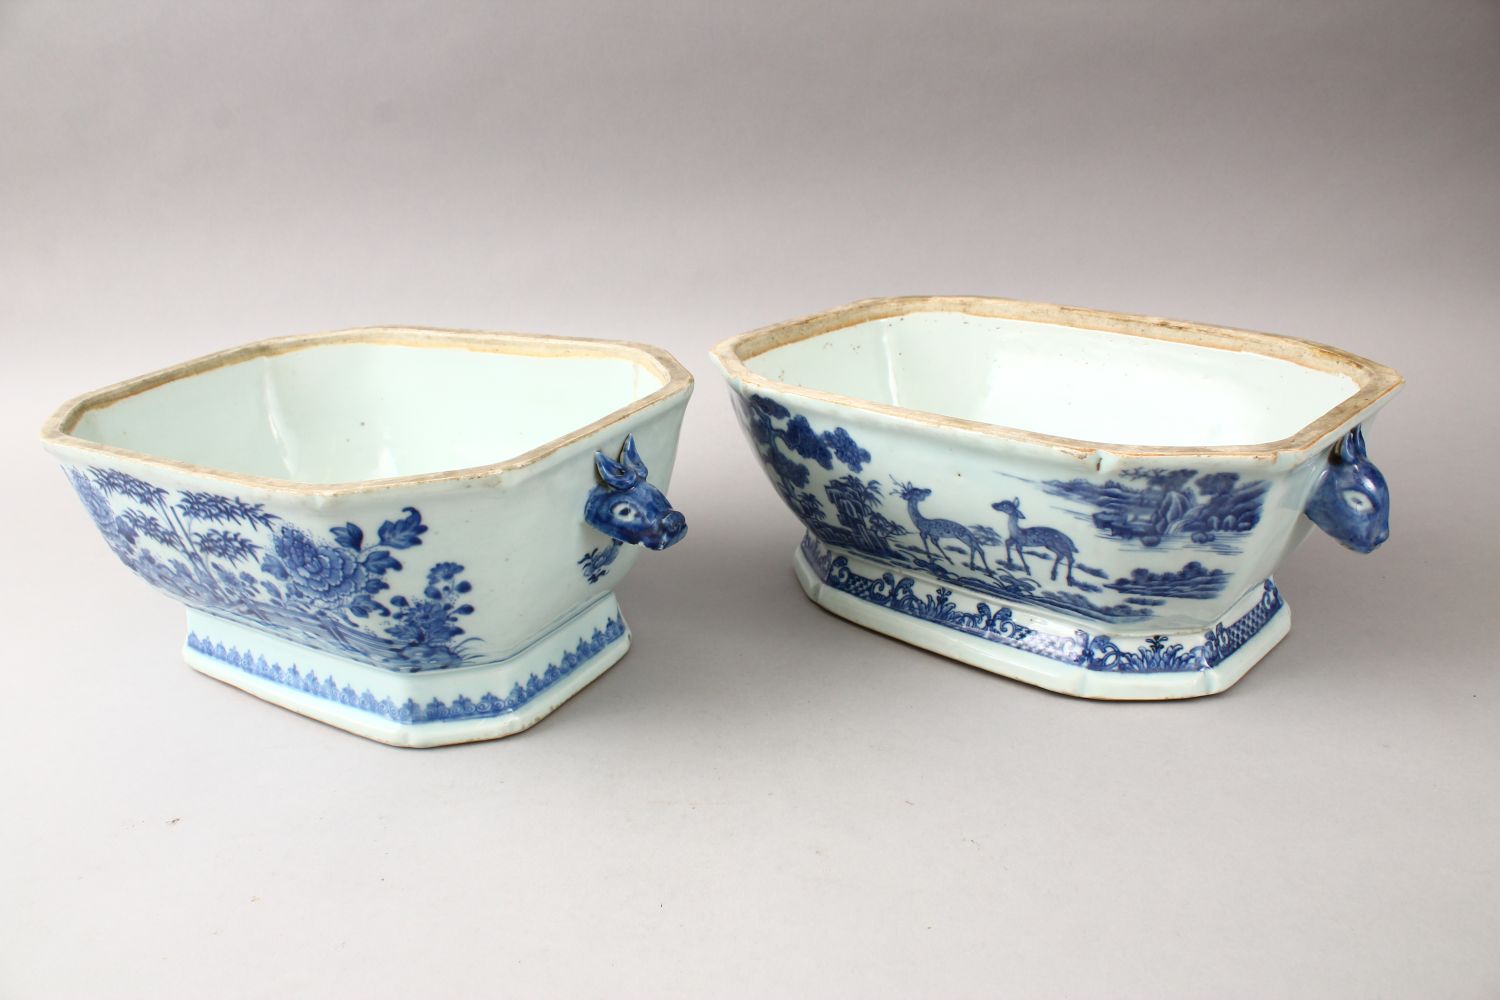 TWO 18TH CENTURY CHINESE BLUE & WHITE PORCELAIN TUREENS, with one associated cover, both decorated - Image 3 of 5